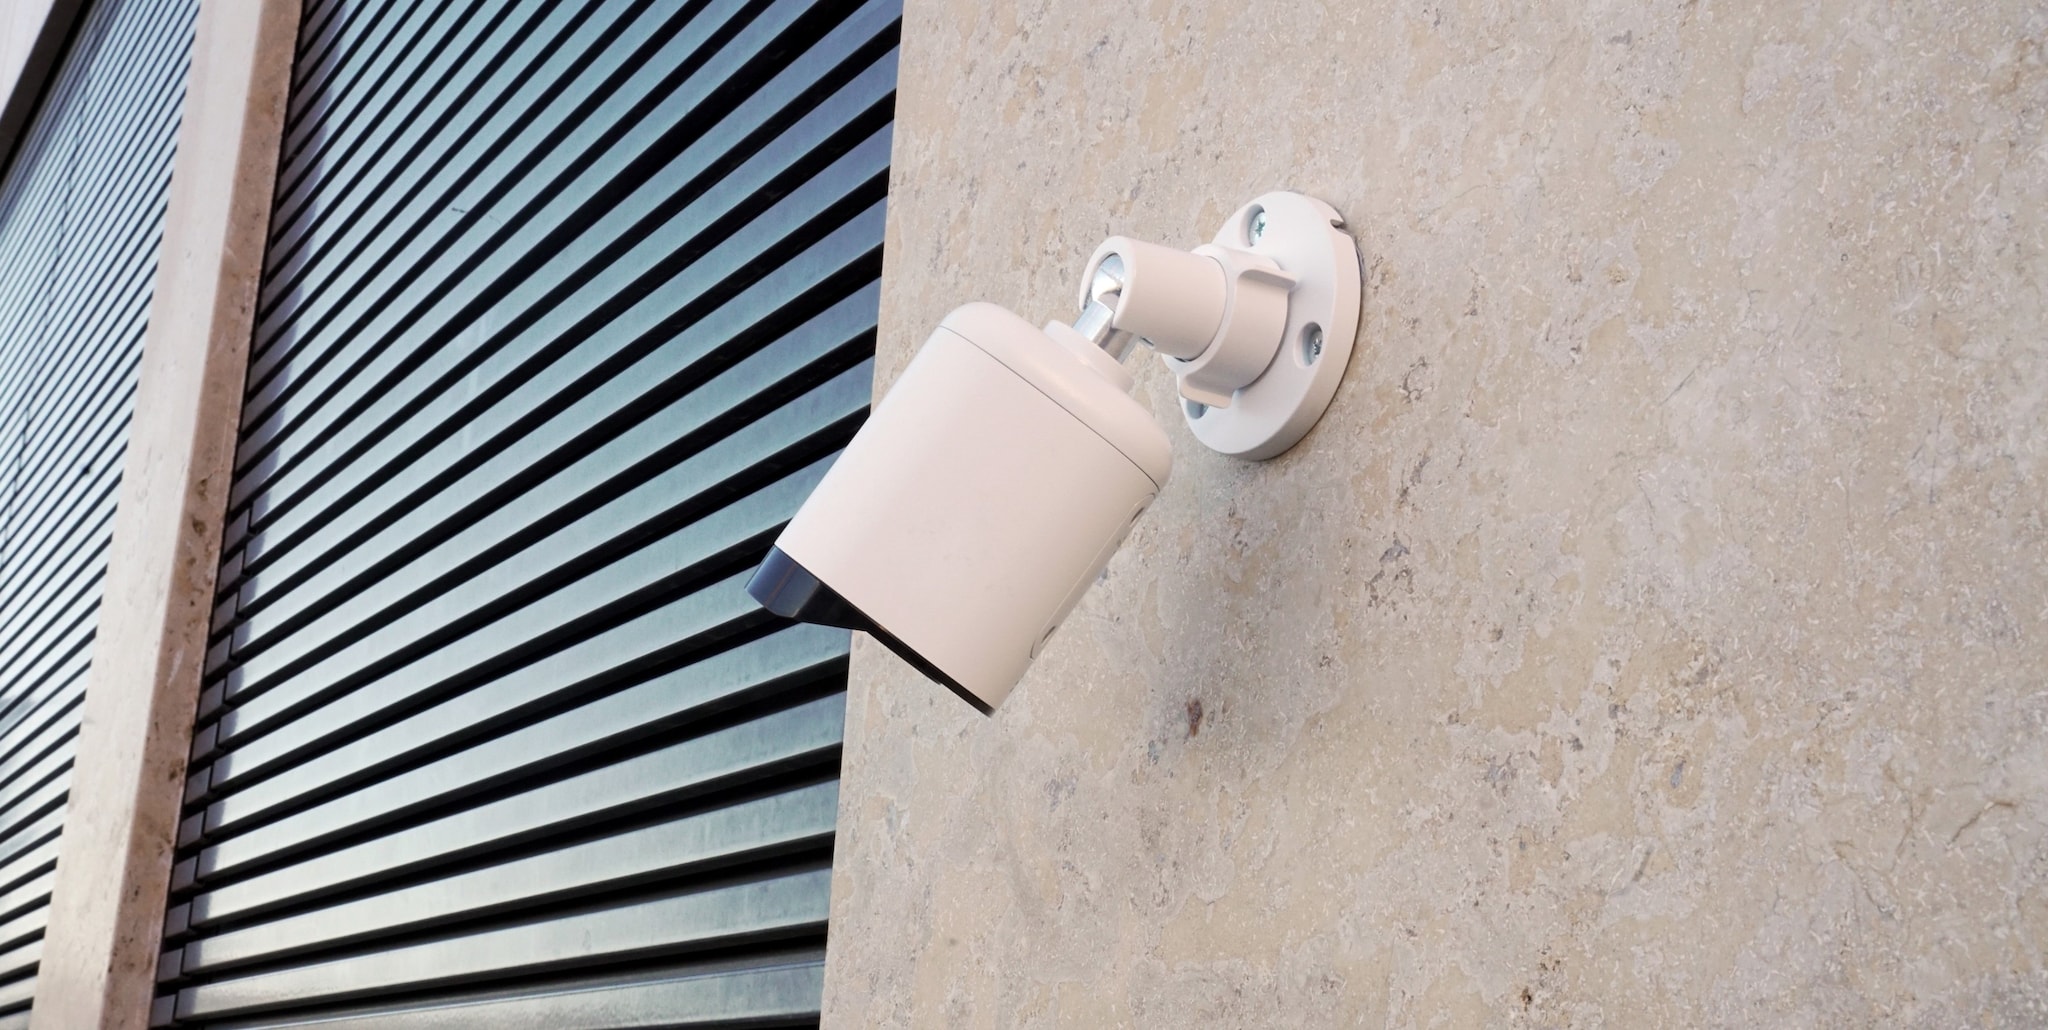 Camera mounted on an outdoor wall